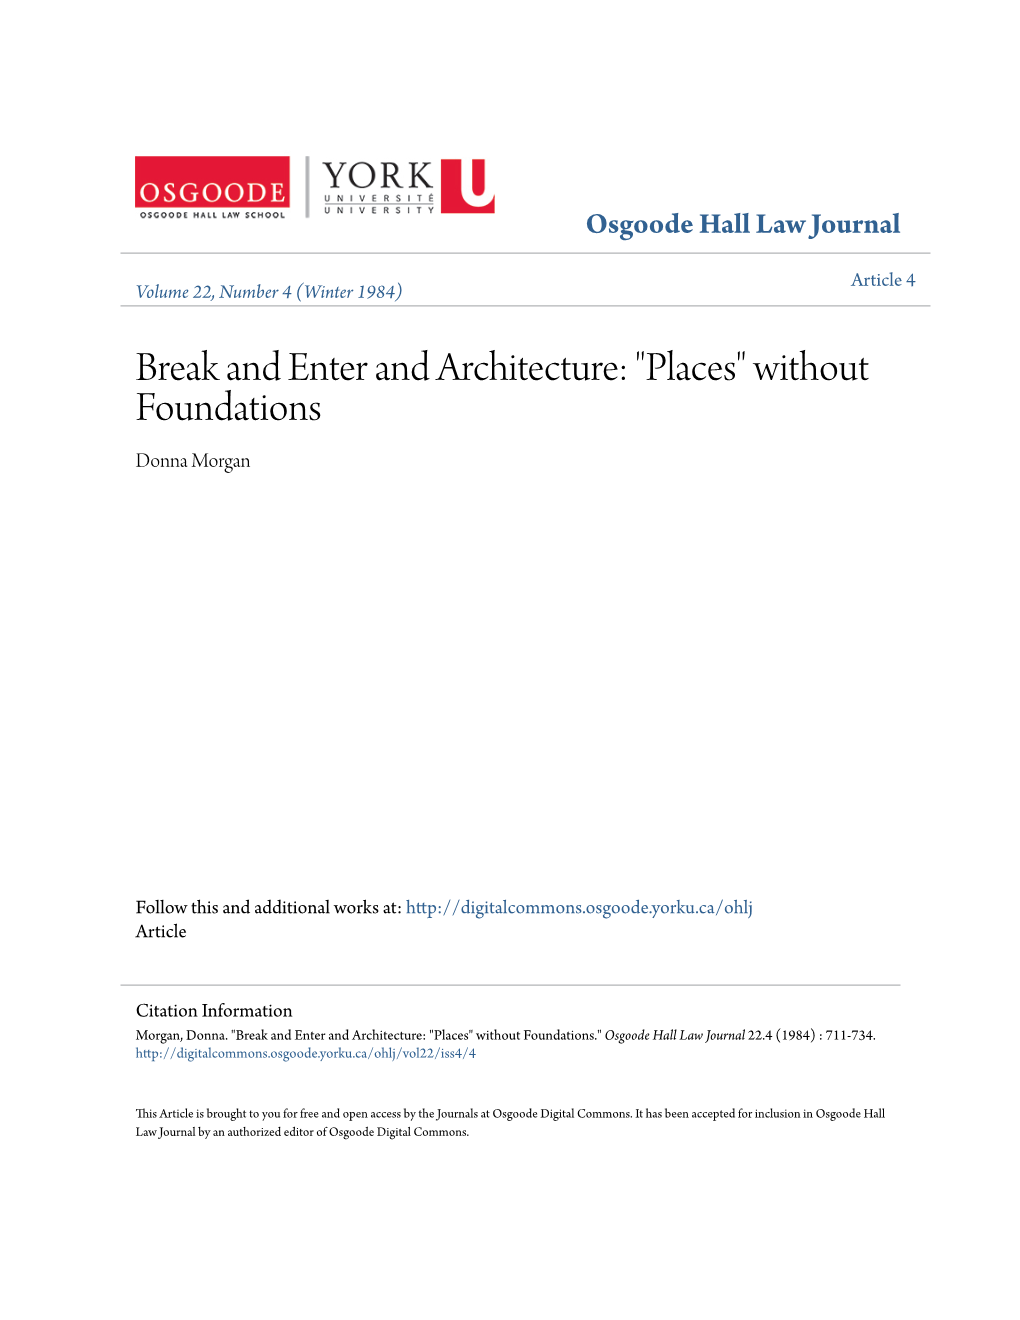 Break and Enter and Architecture: "Places" Without Foundations Donna Morgan